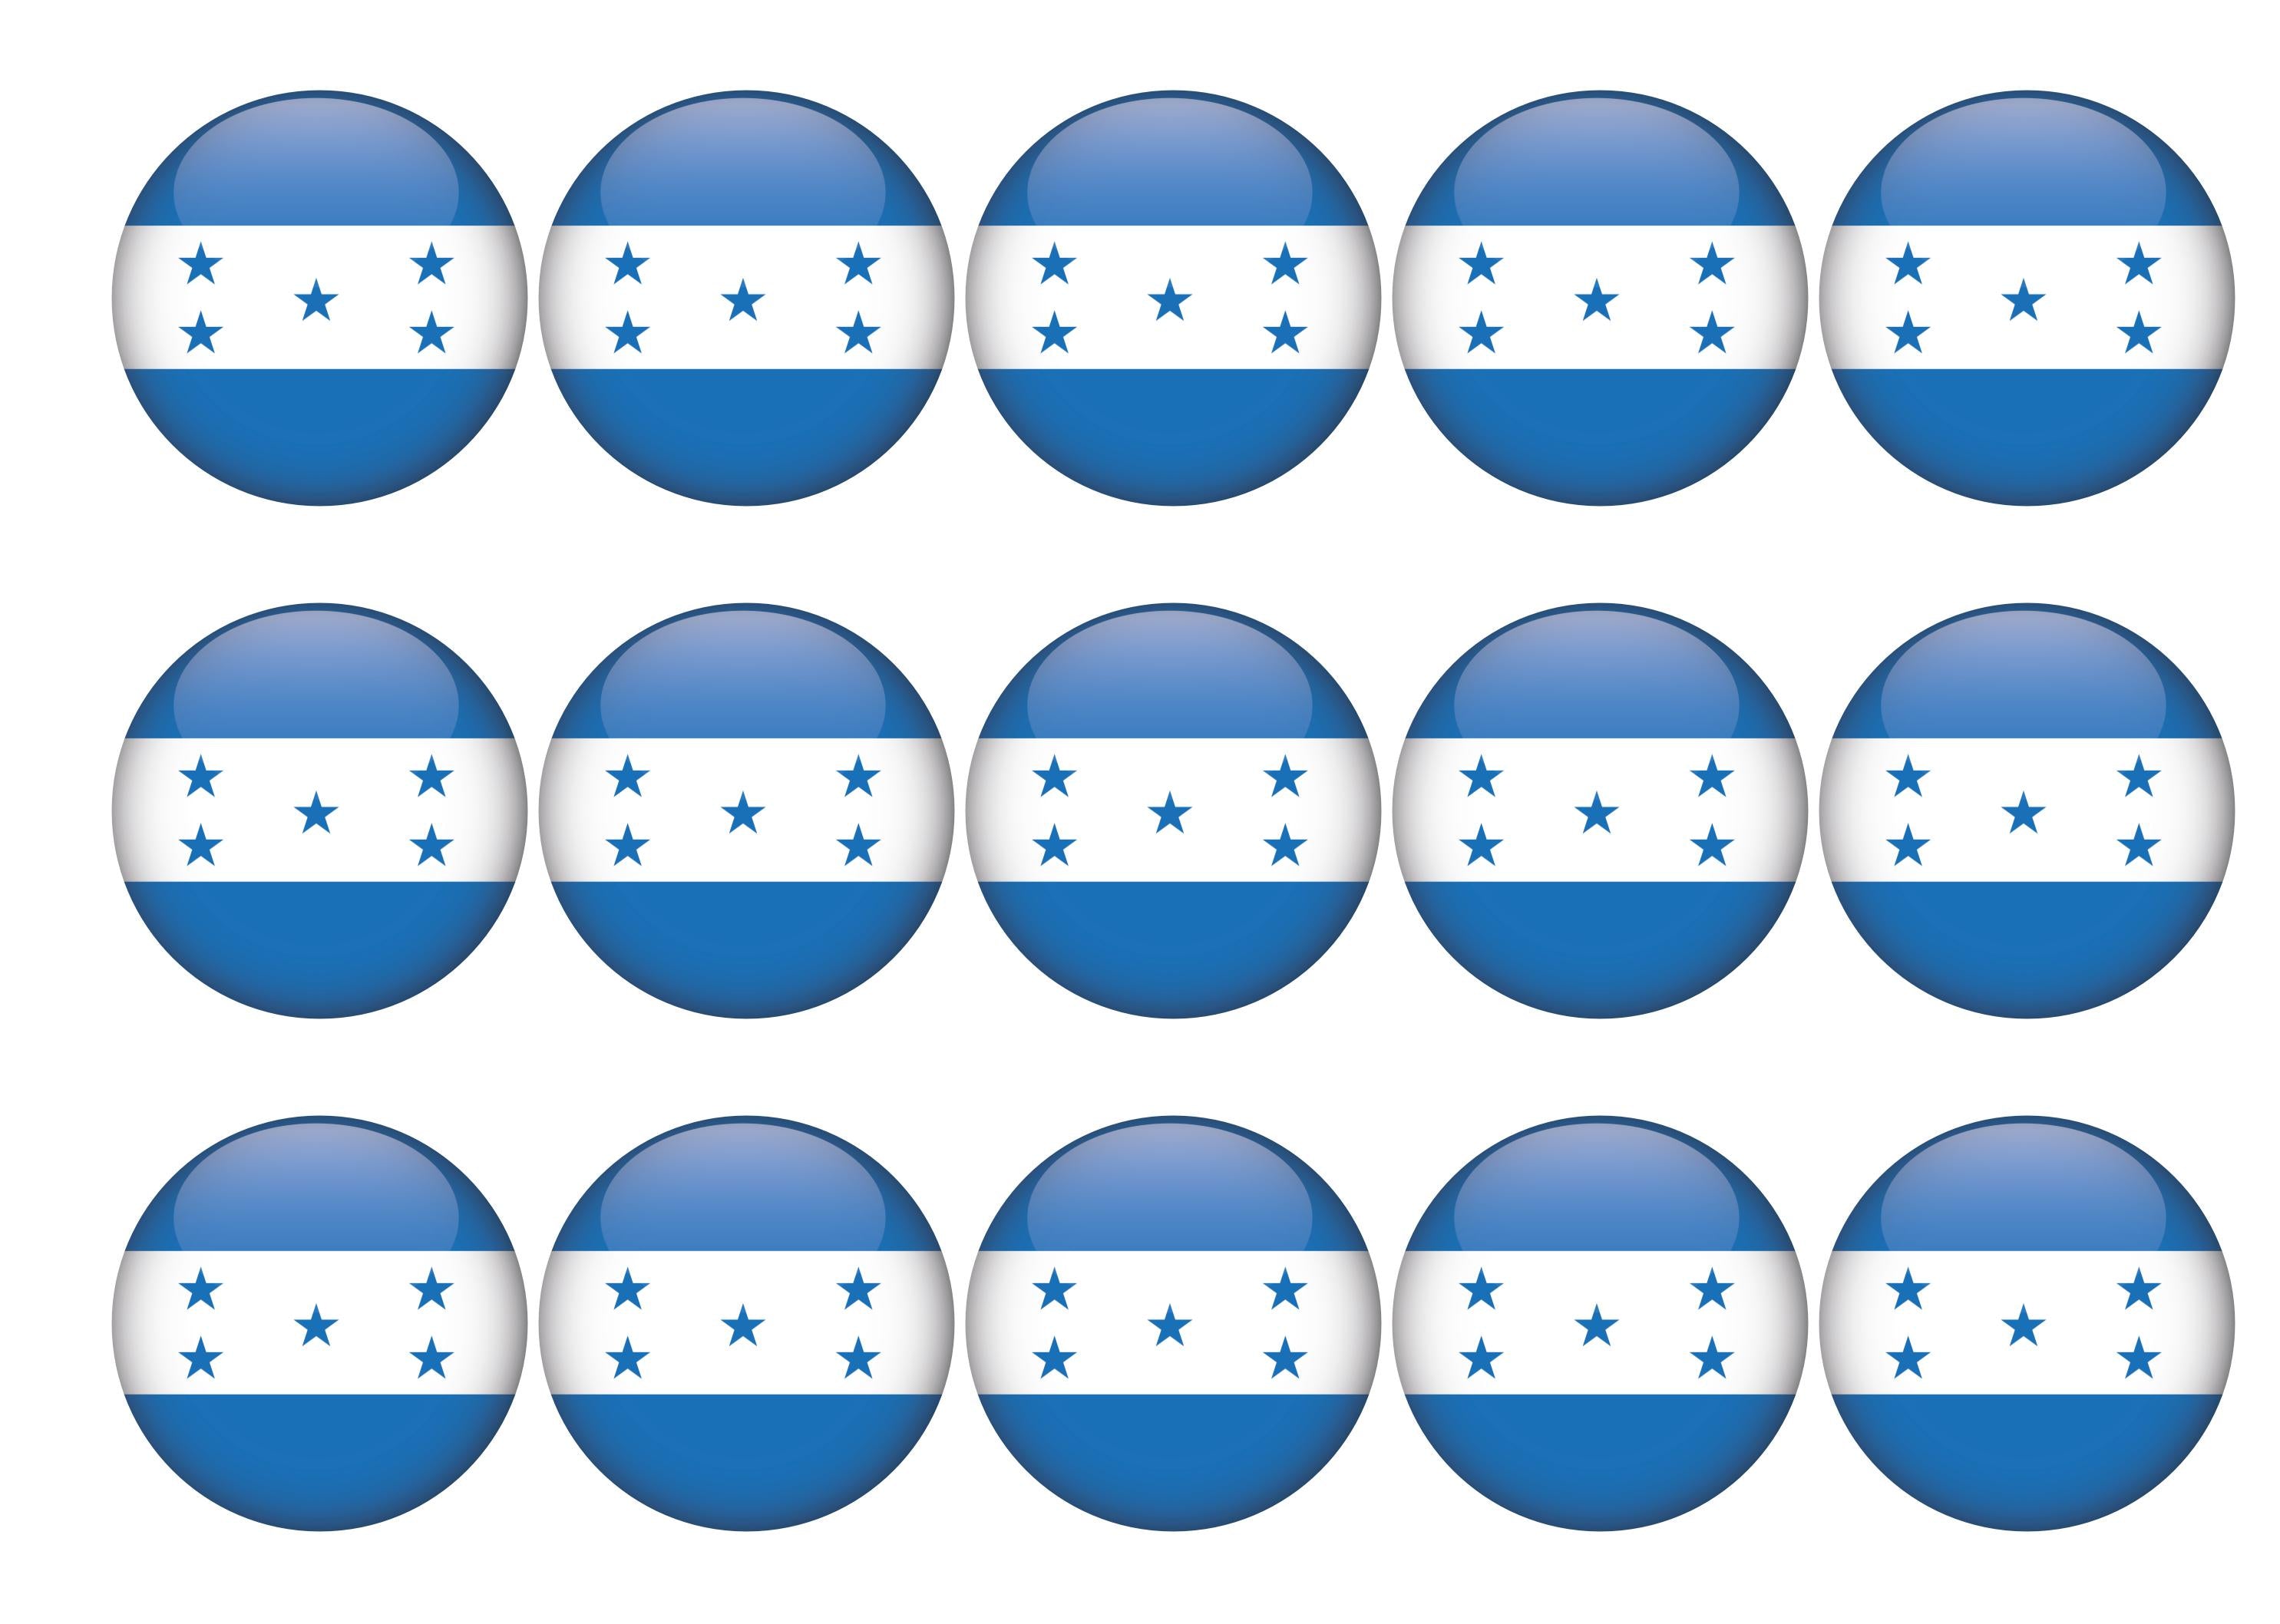 15 cupcake toppers with the flag of Honduras